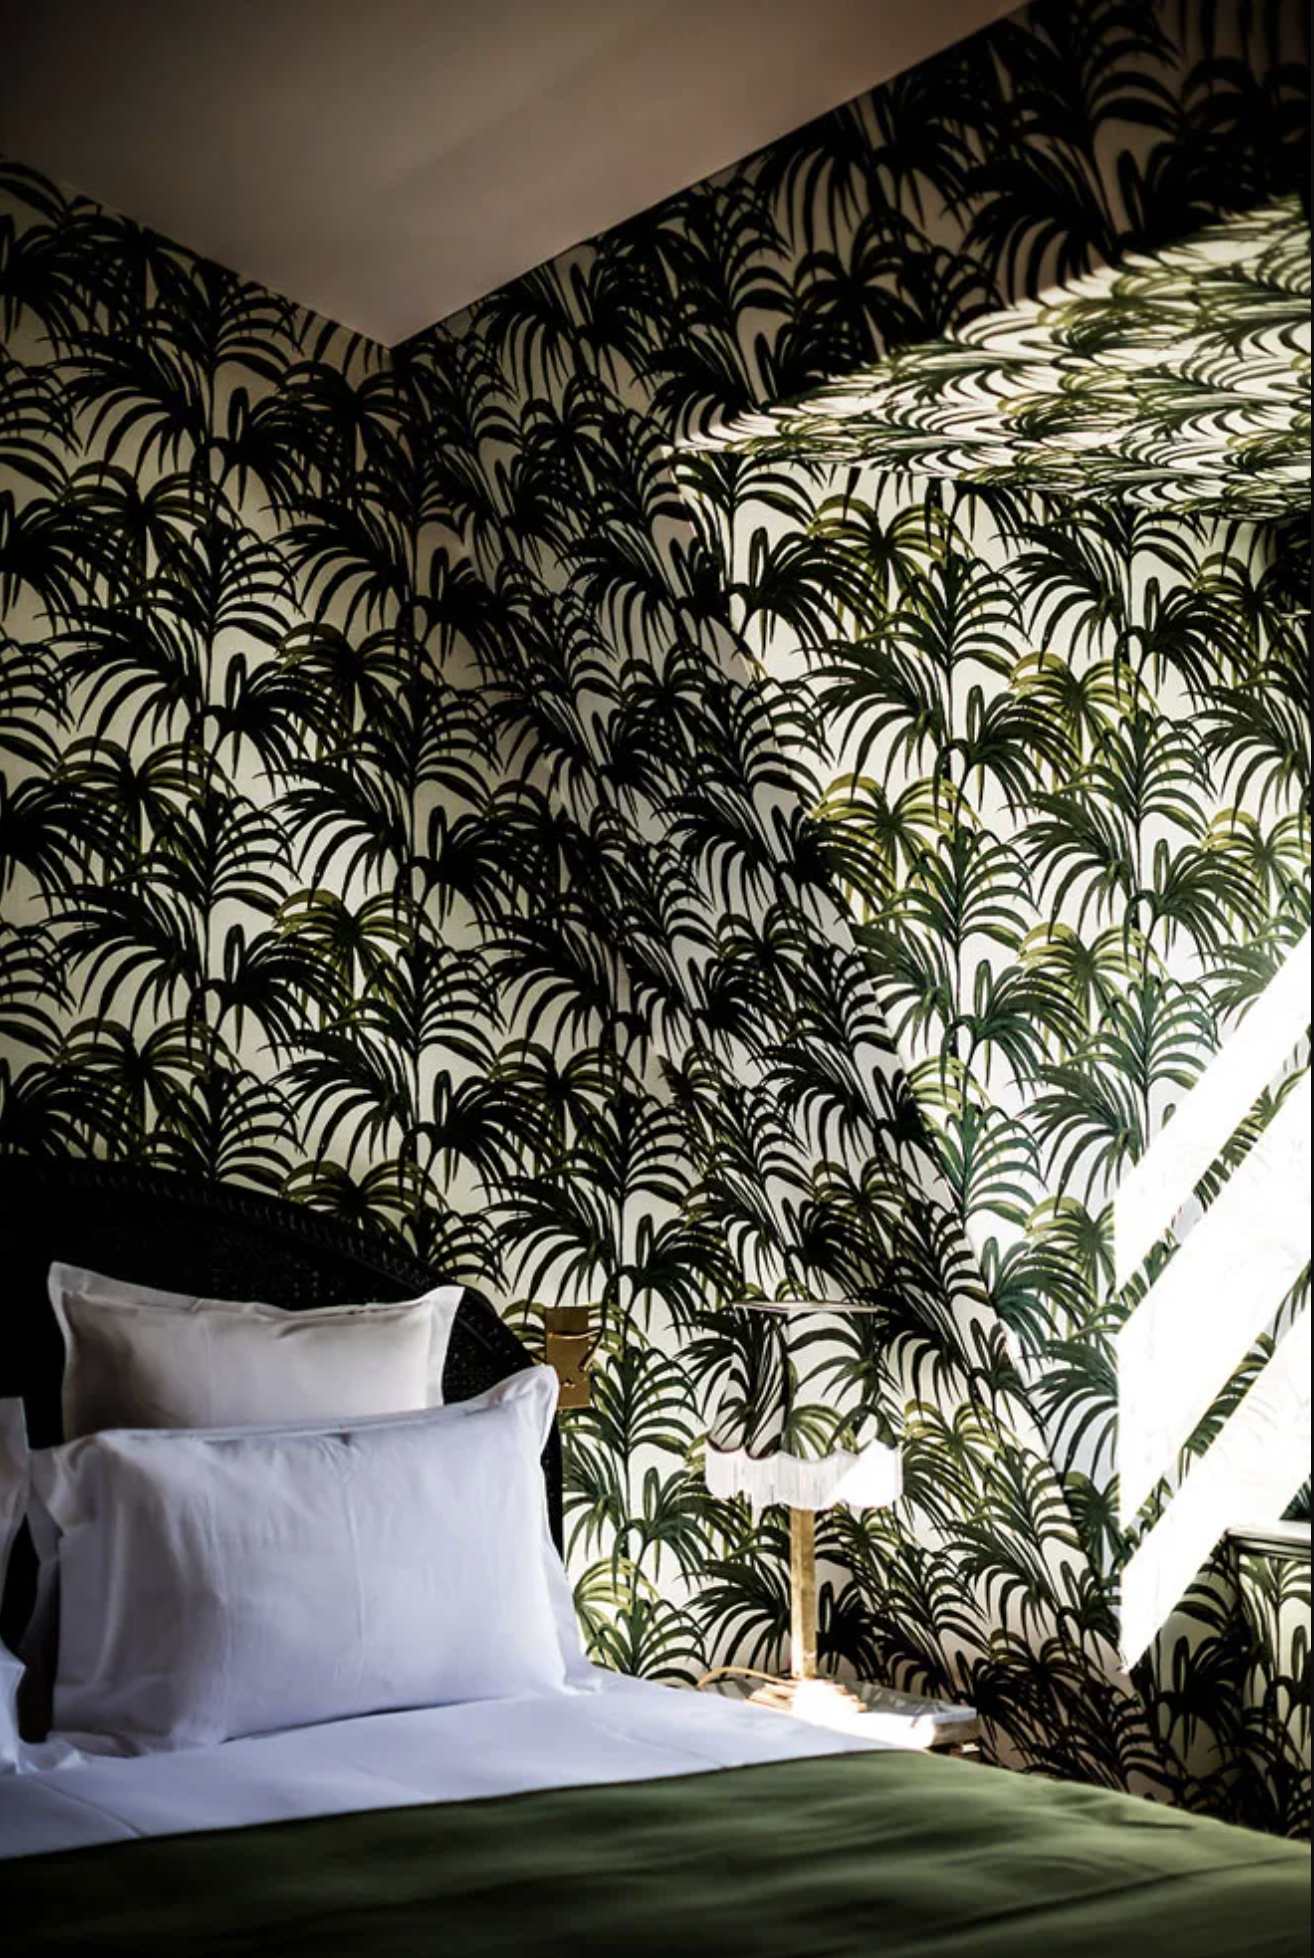 A tropical green palm tree wallpaper suite at Hotel Providence with natural light flooding in from the bedside window